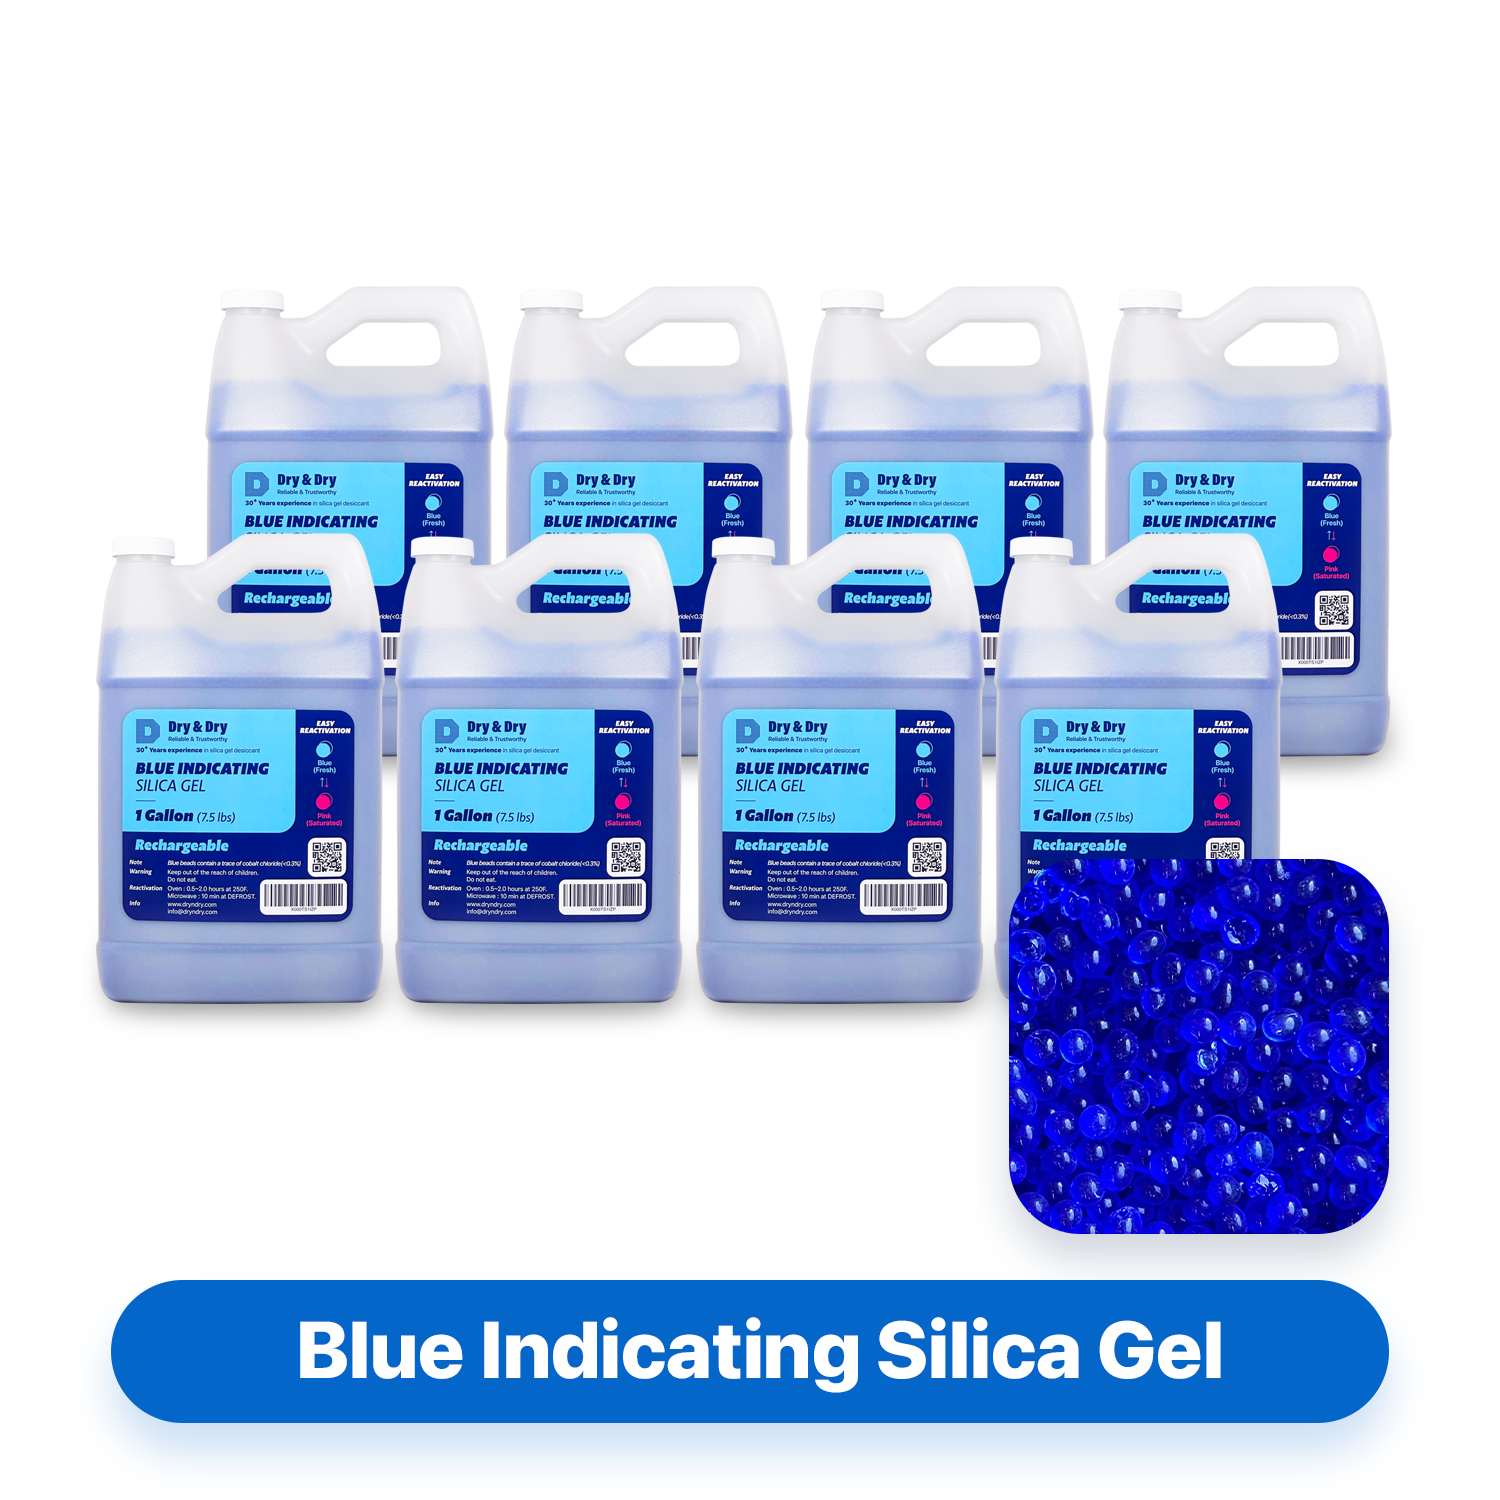 8 Gallon [60 LBS] Premium Blue Indicating Silica Gel Beads(Industry Standard 3-5 mm) - Reusable